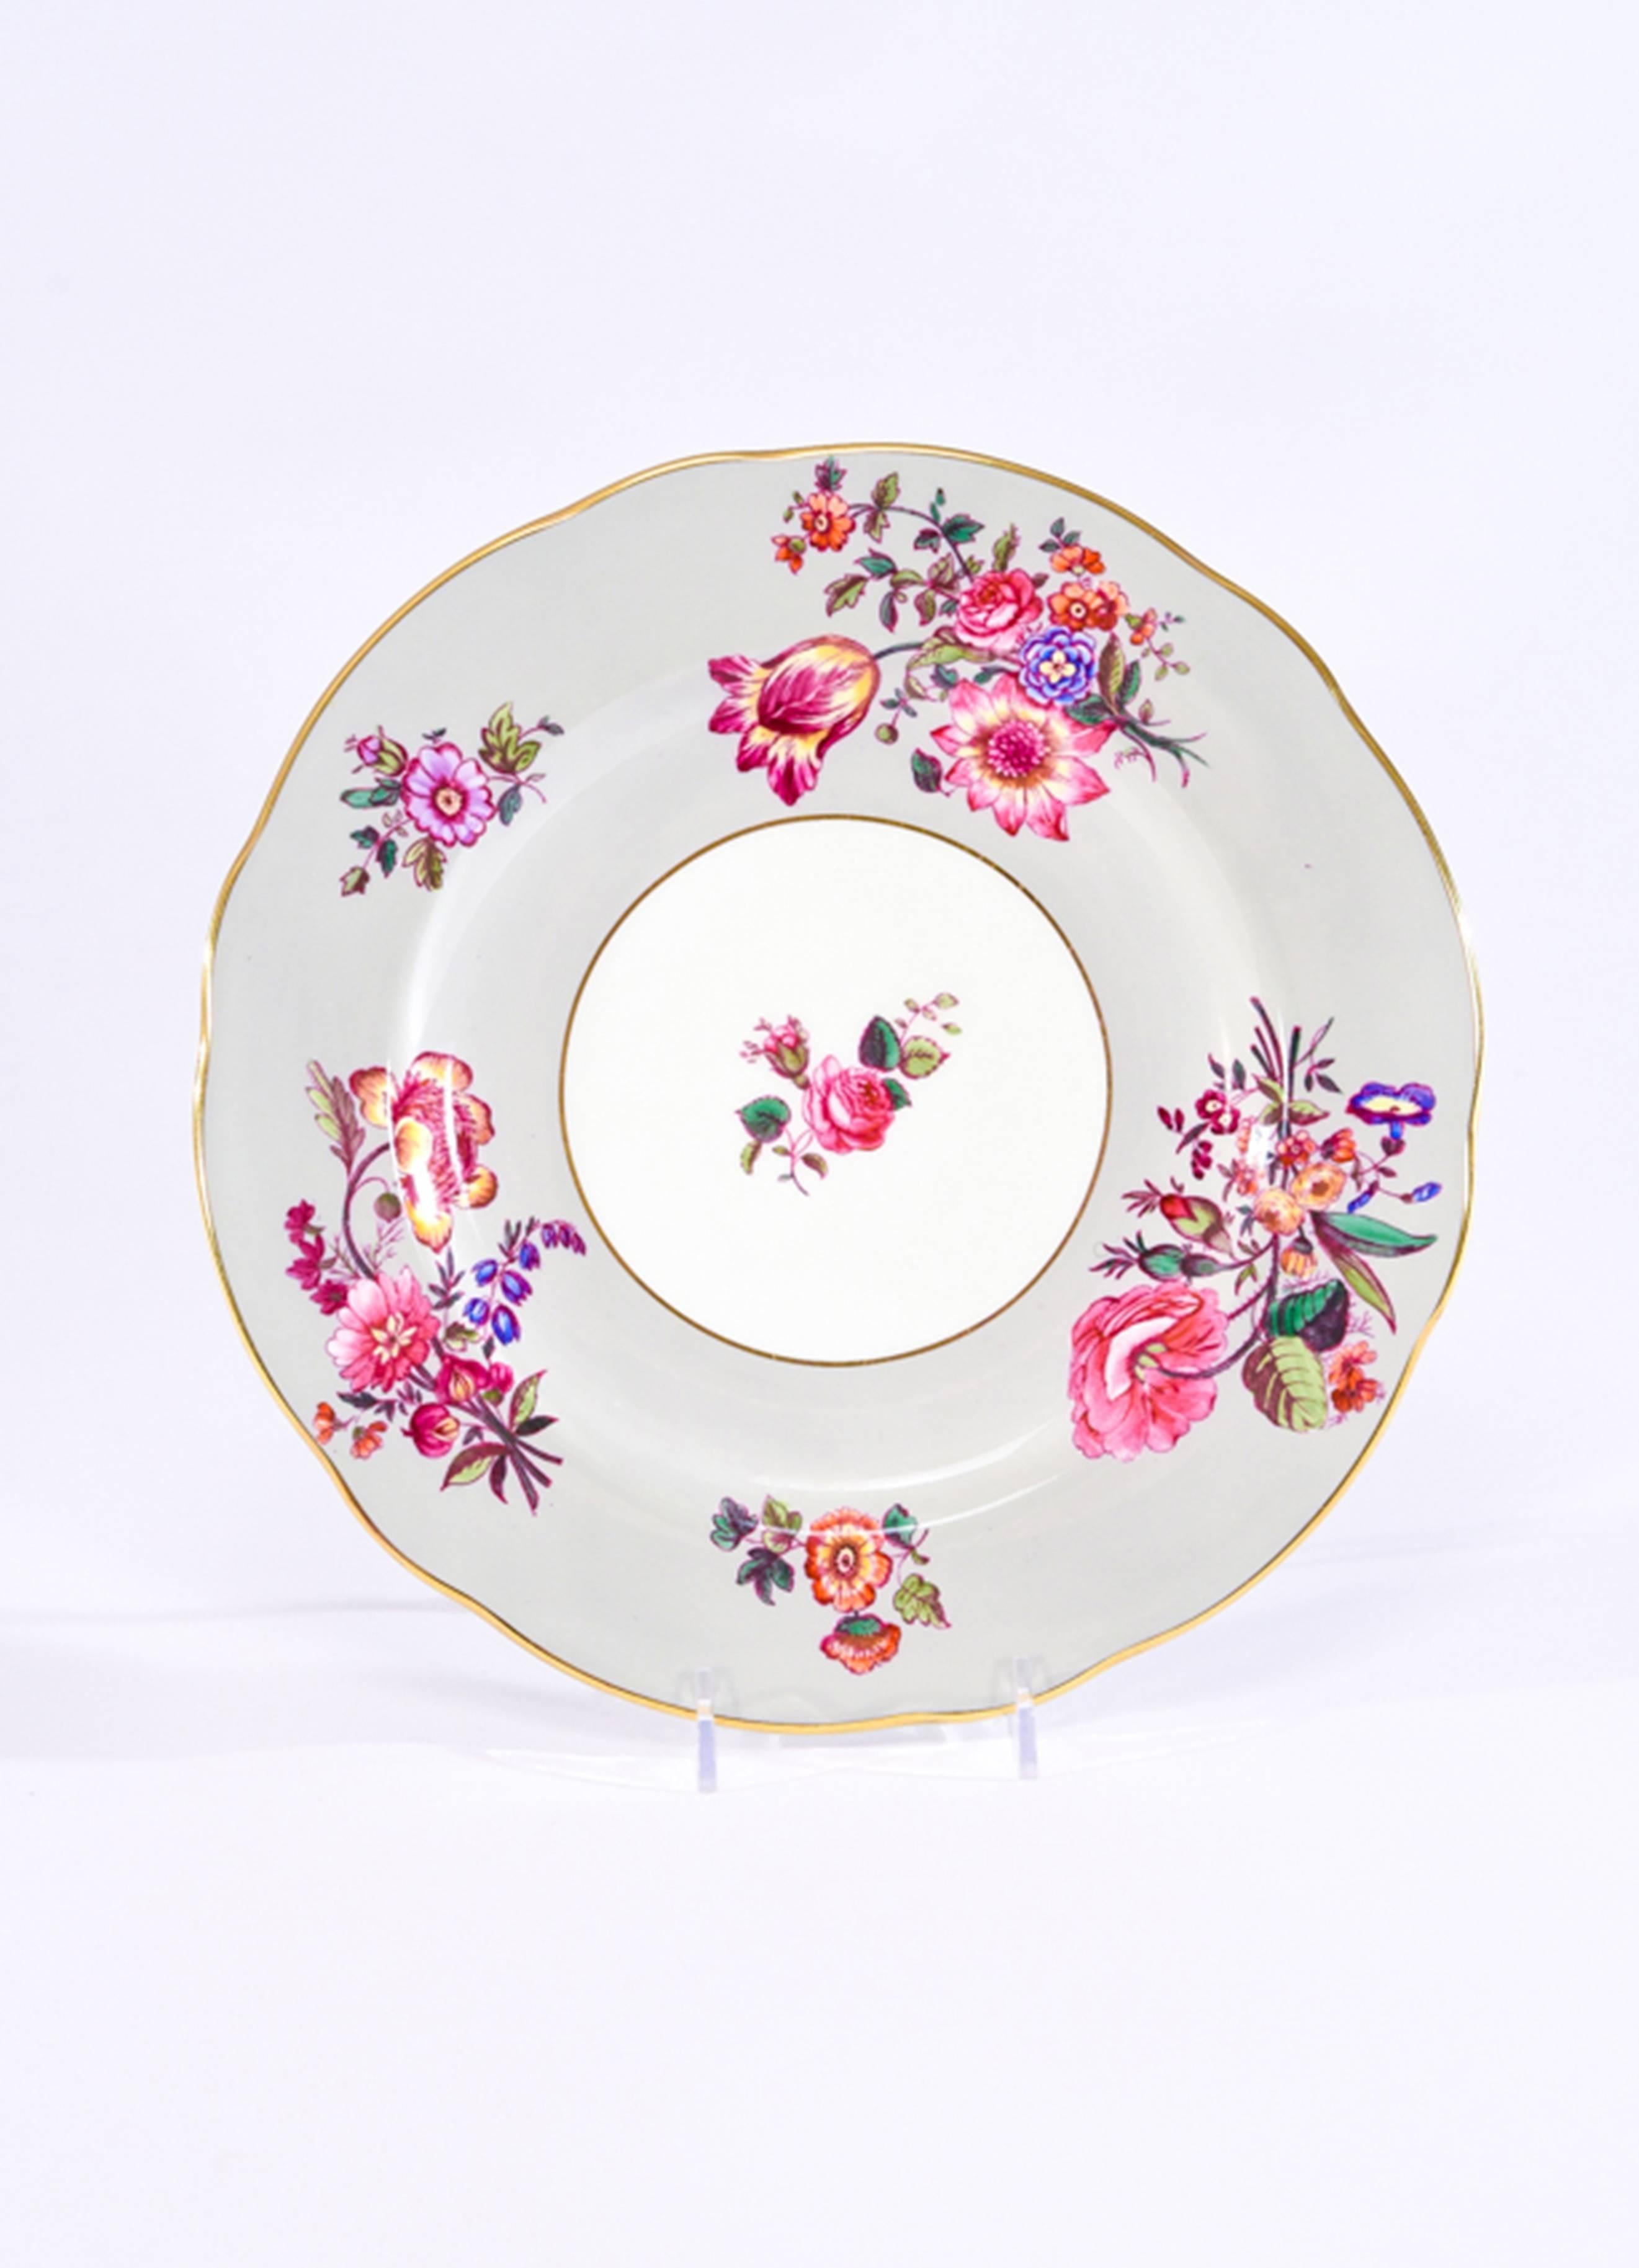 This set of 12 Coalport dinner plates feature an unusual color combination of a soft gray border decorated with a vibrant palette of brightly painted flowers. There are various combinations of flower arrangements encircling the border and the